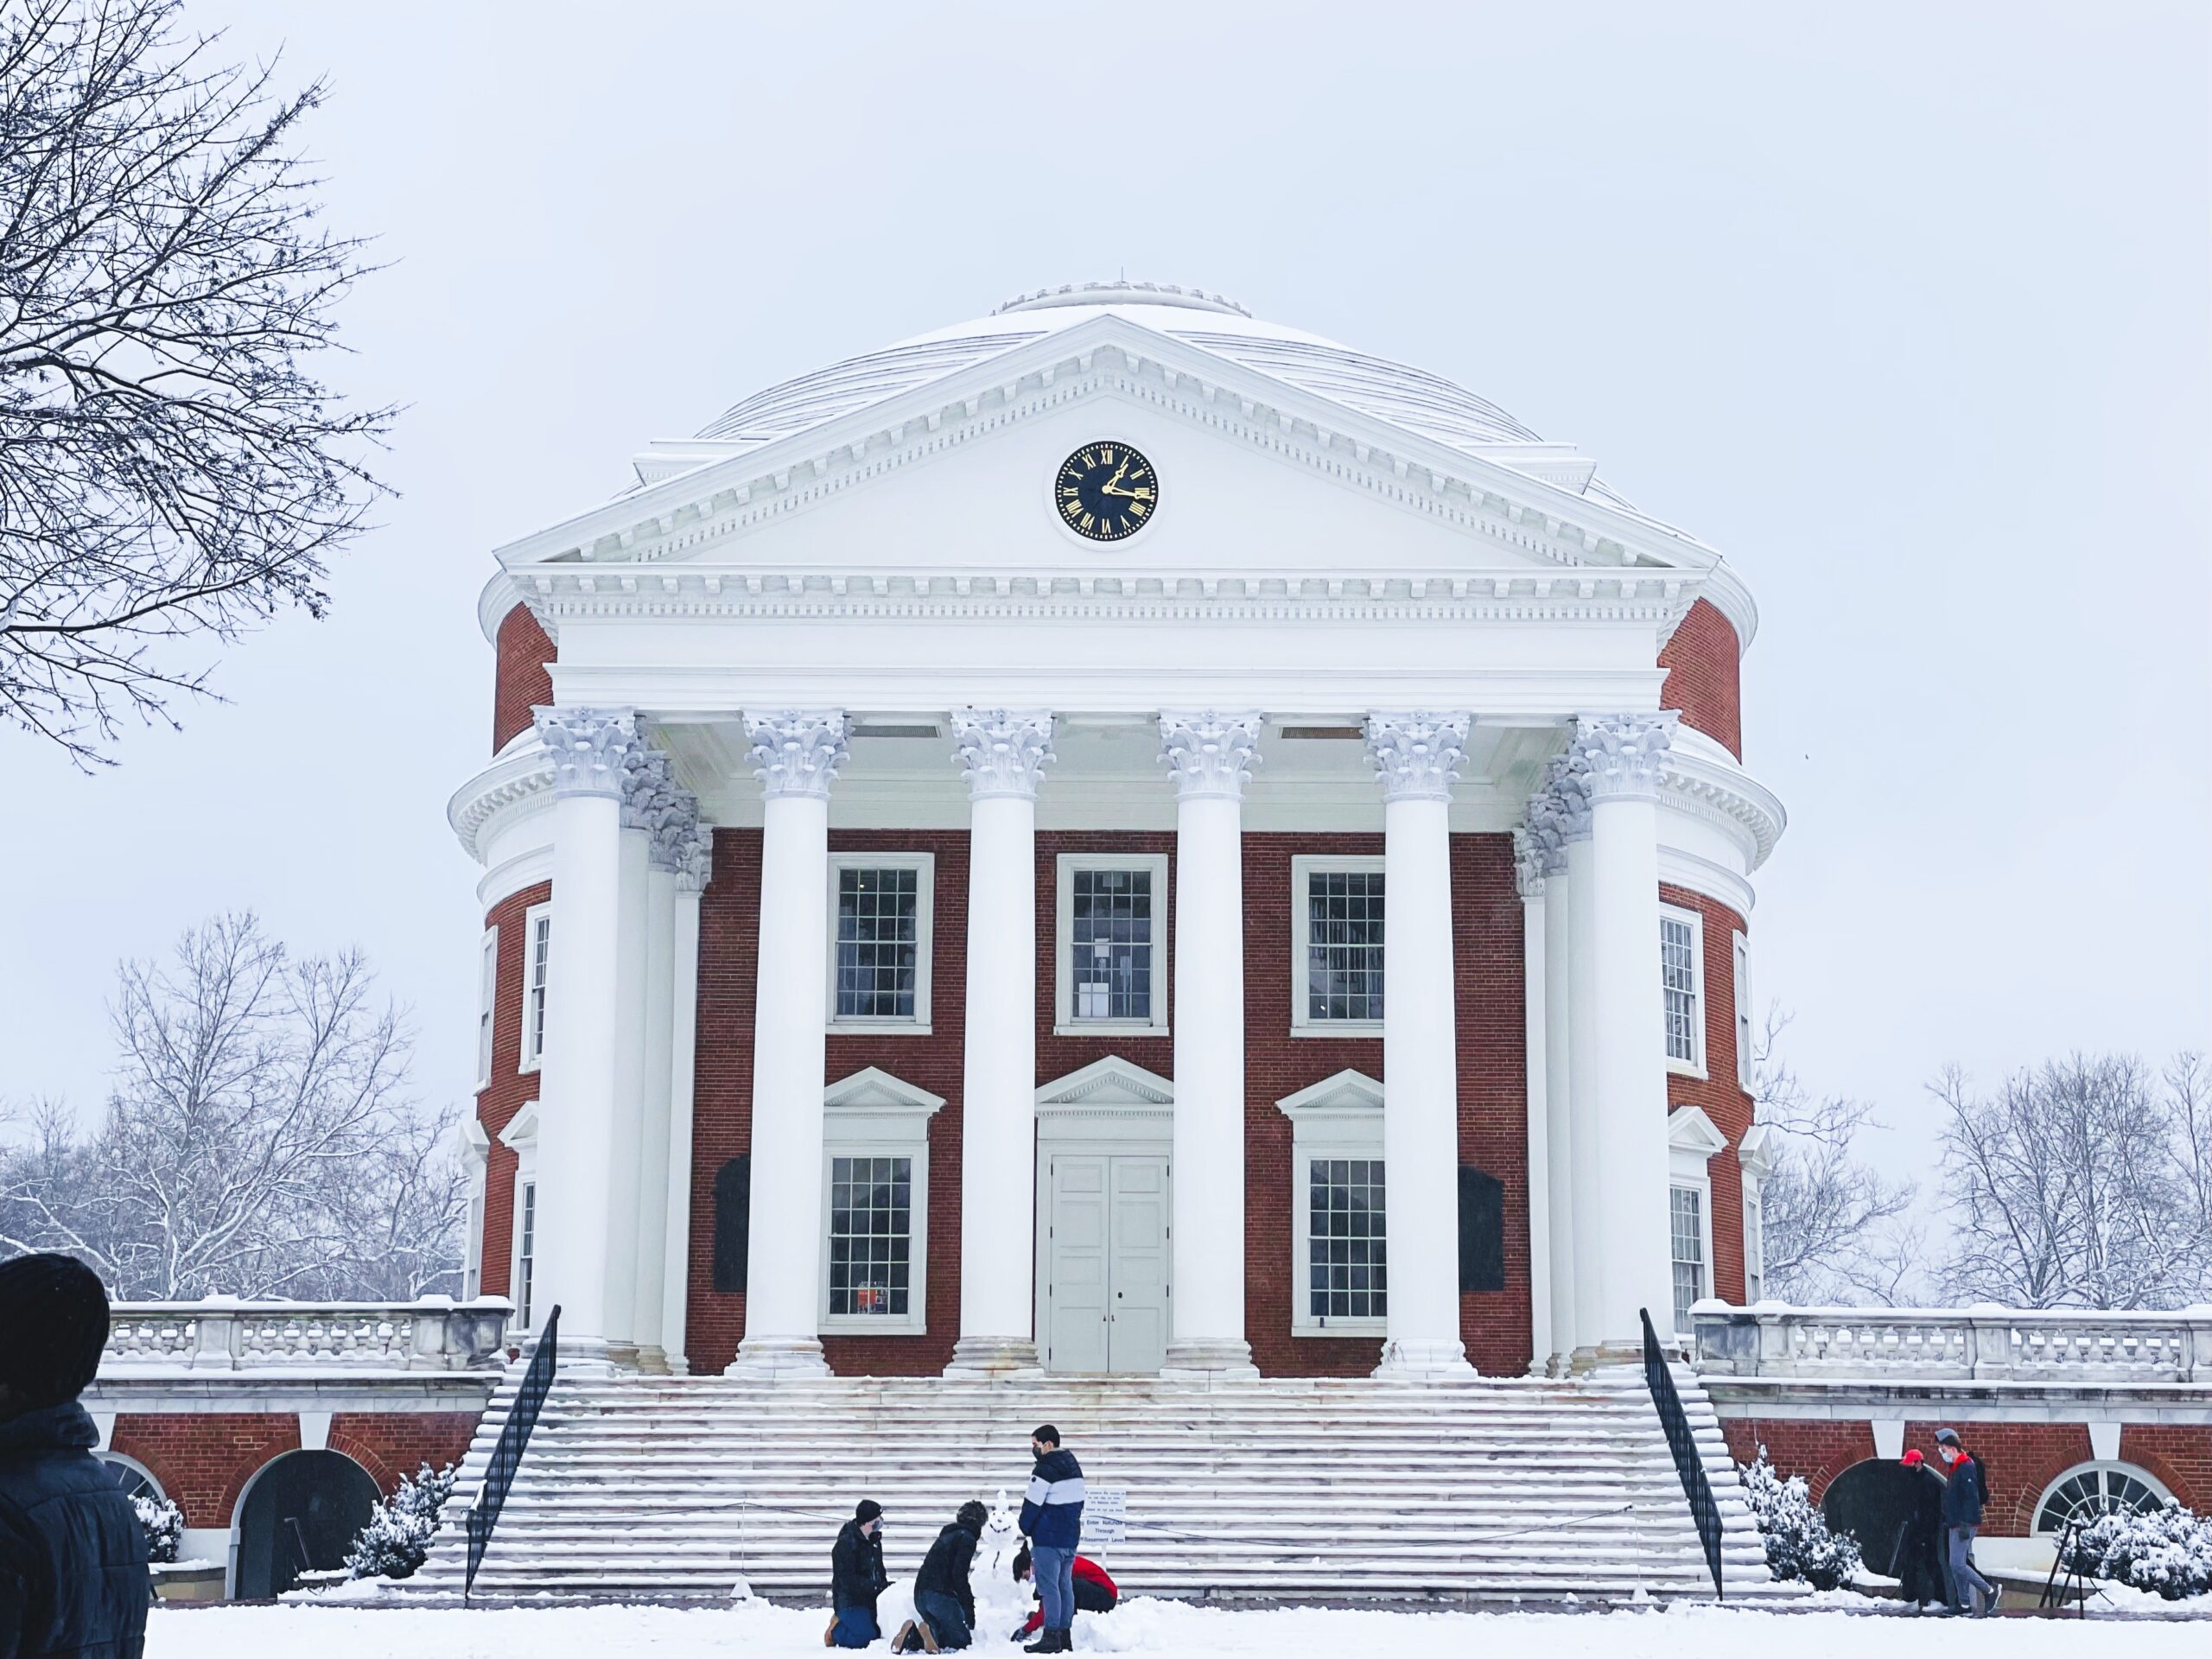 How to Get Into UVA